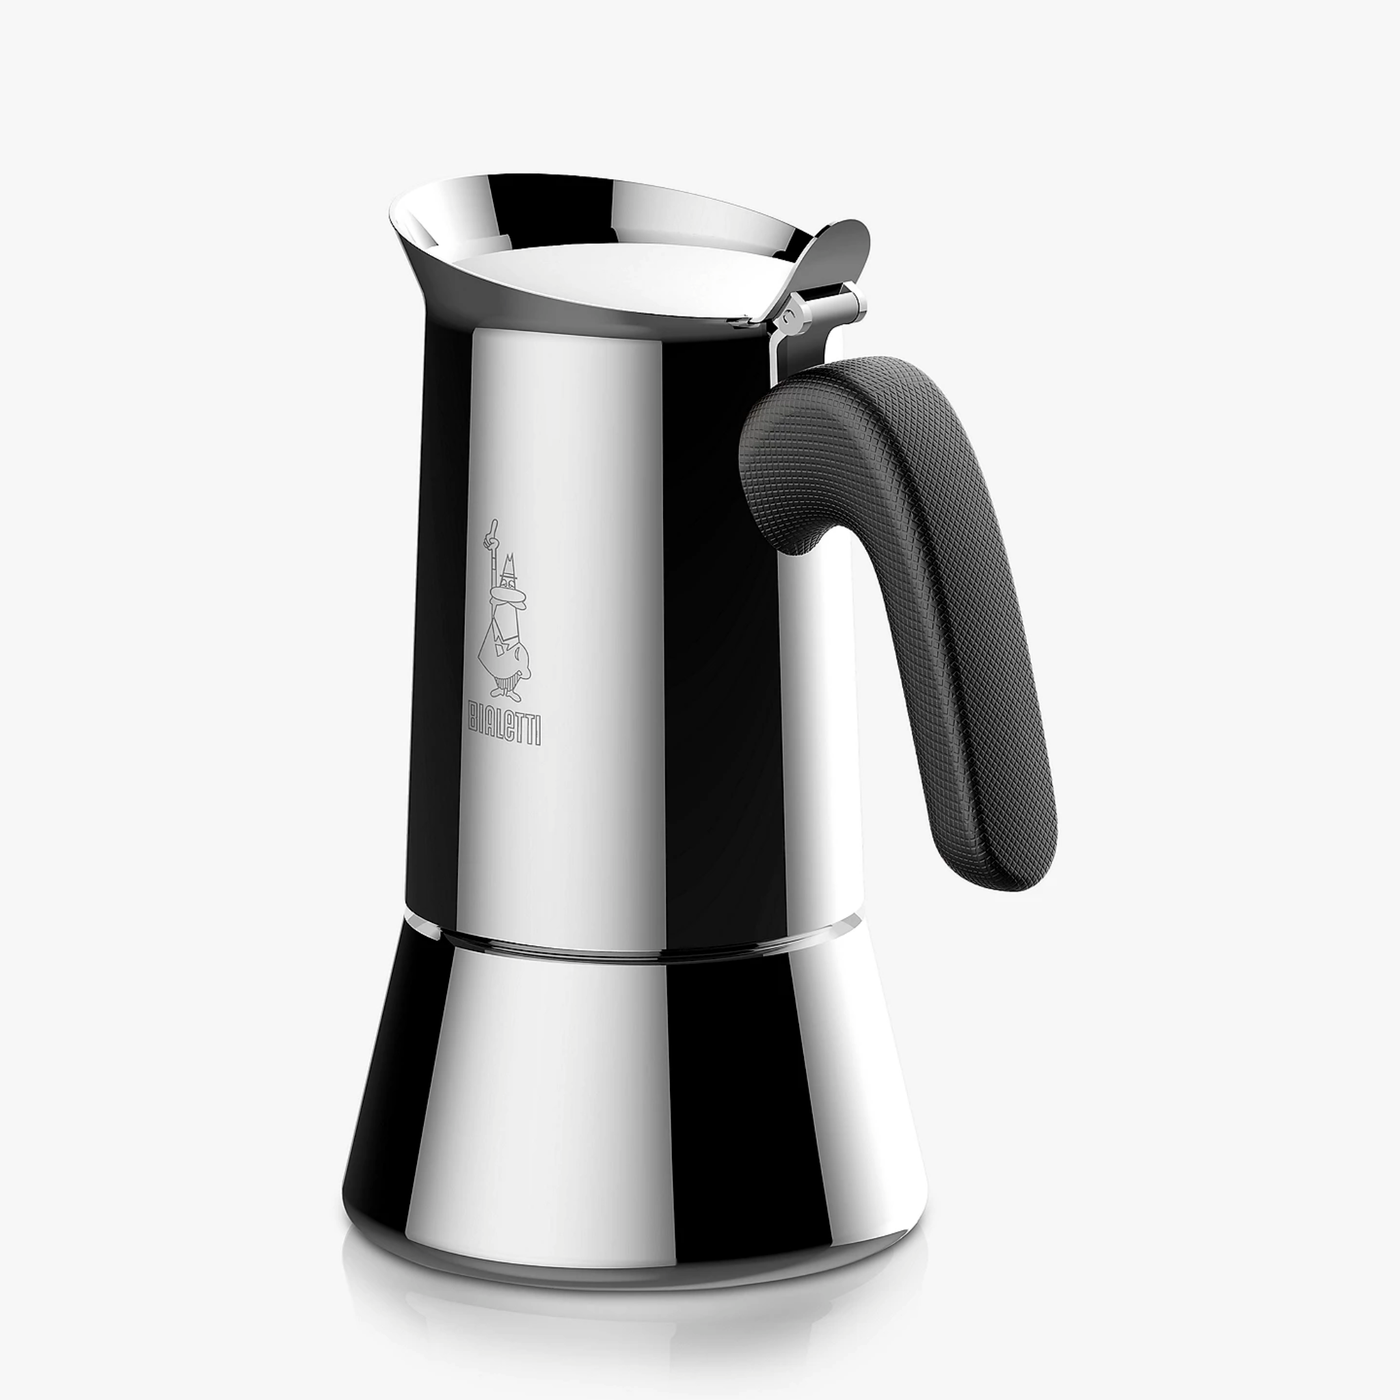 Bialetti Venus Stainless Steel Stovetop Espresso Coffee Maker – 4-Cup